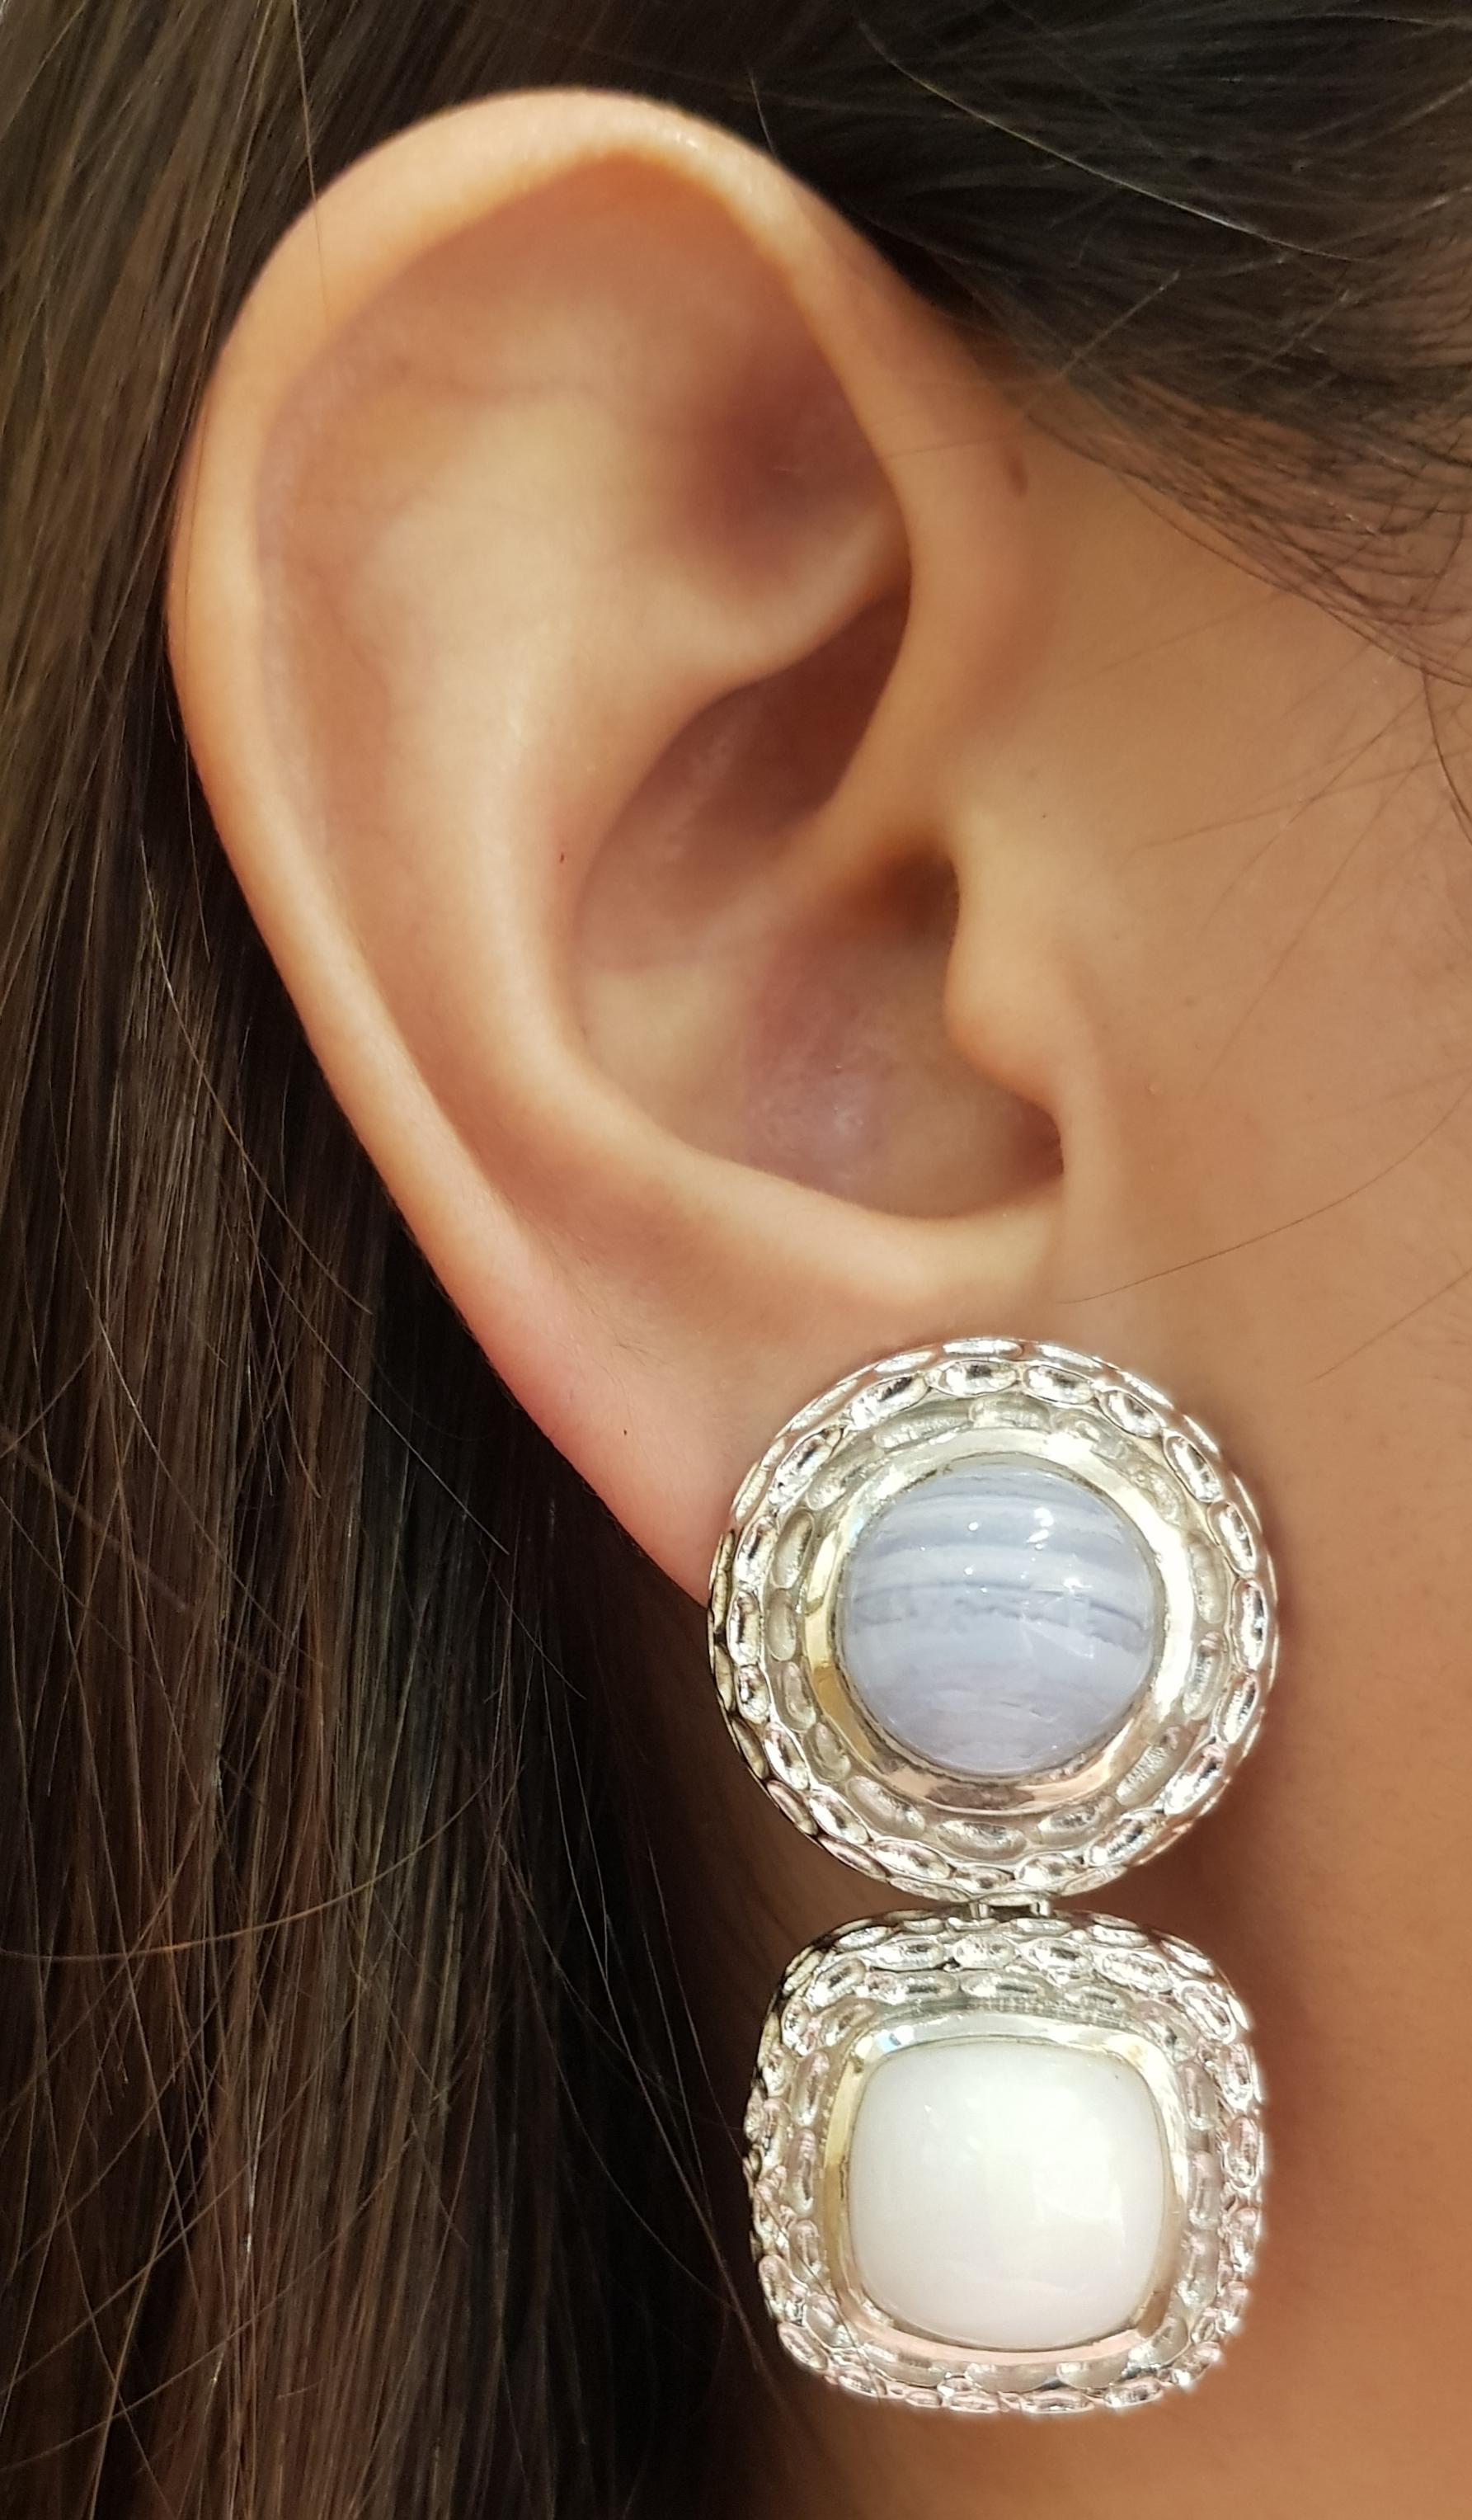 Chalcedony and Agate Earrings set in Silver Settings

Width: 2.0 cm 
Length: 4.2 cm
Total Weight:  32.34 grams

*Please note that the silver setting is plated with rhodium to promote shine and help prevent oxidation.  However, with the nature of